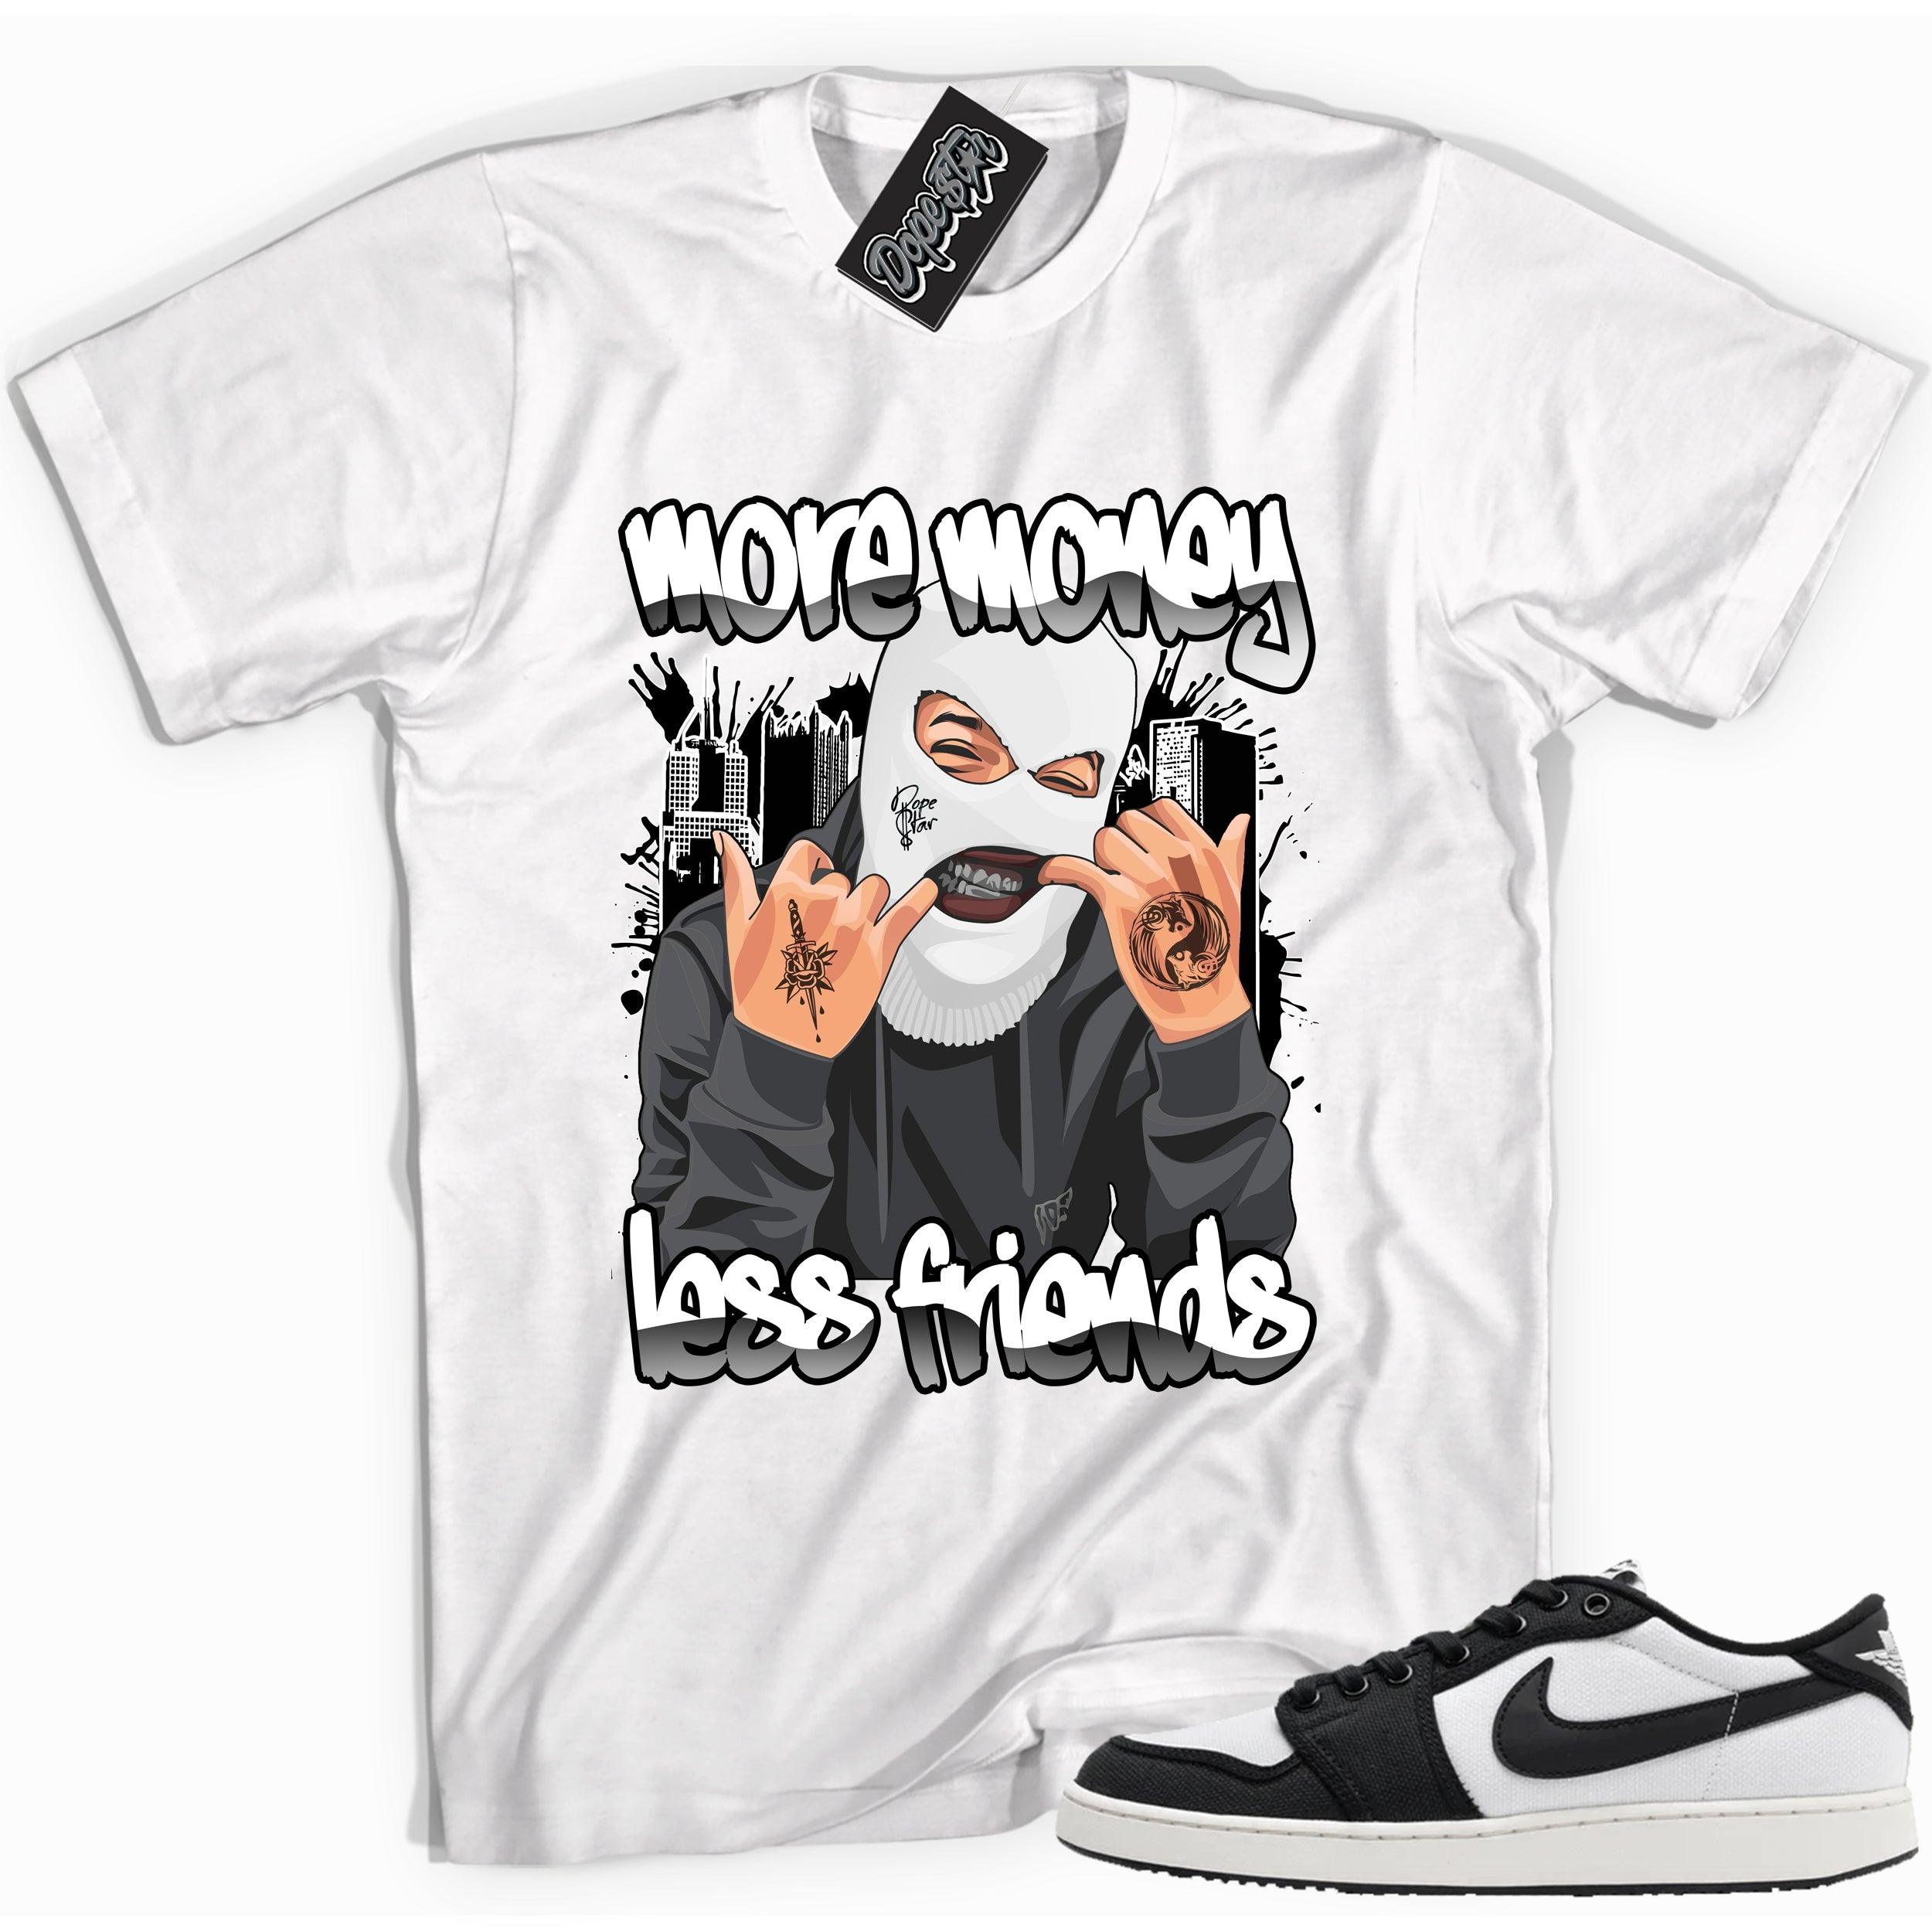 Cool white graphic tee with 'more money less friends' print, that perfectly matches Air Jordan 1 Retro Ajko Low Black & White sneakers.